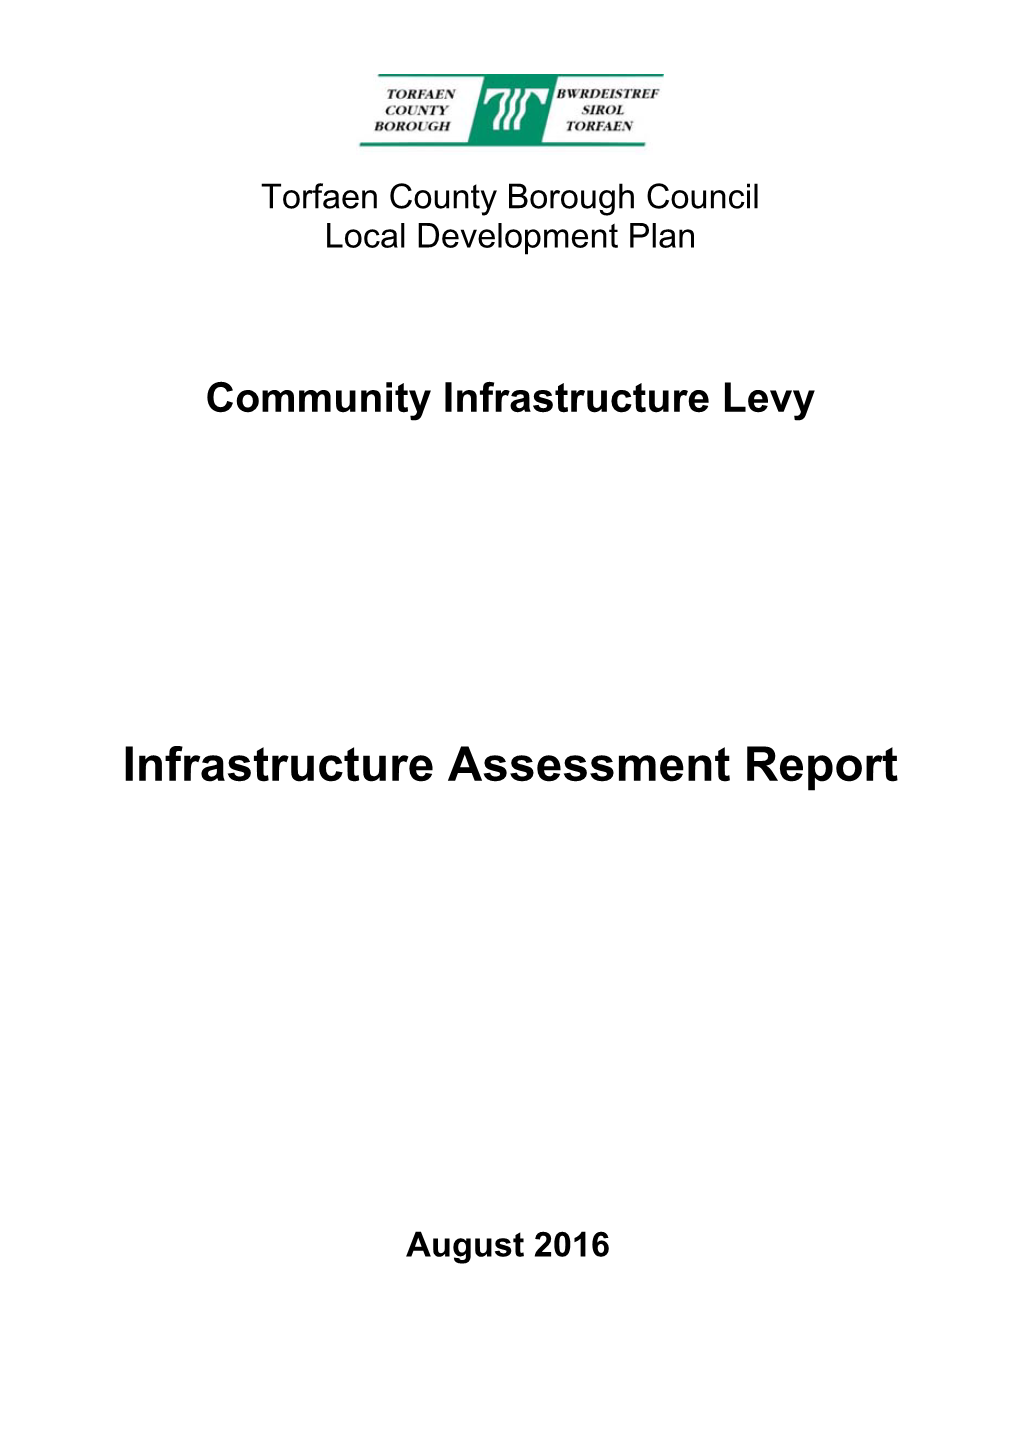 Infrastructure Assessment Report, August 2016